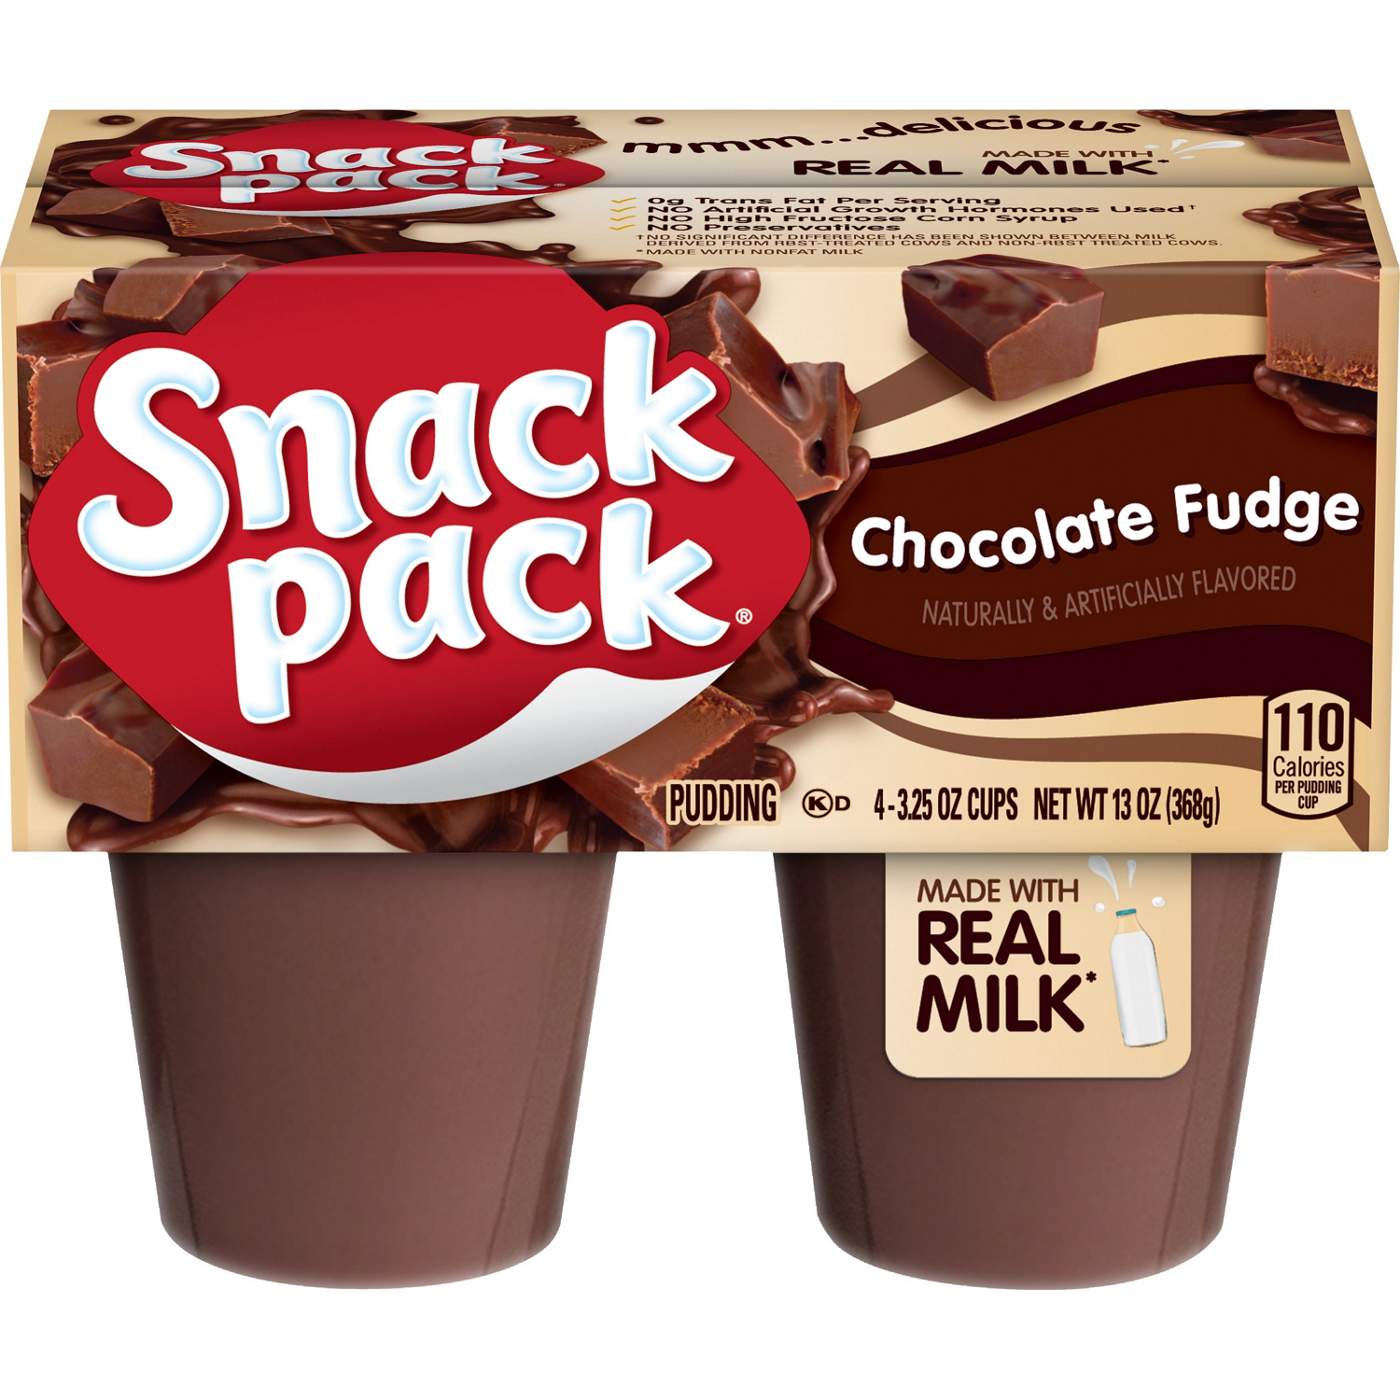 Snack Pack Chocolate Fudge Pudding Cups; image 1 of 7